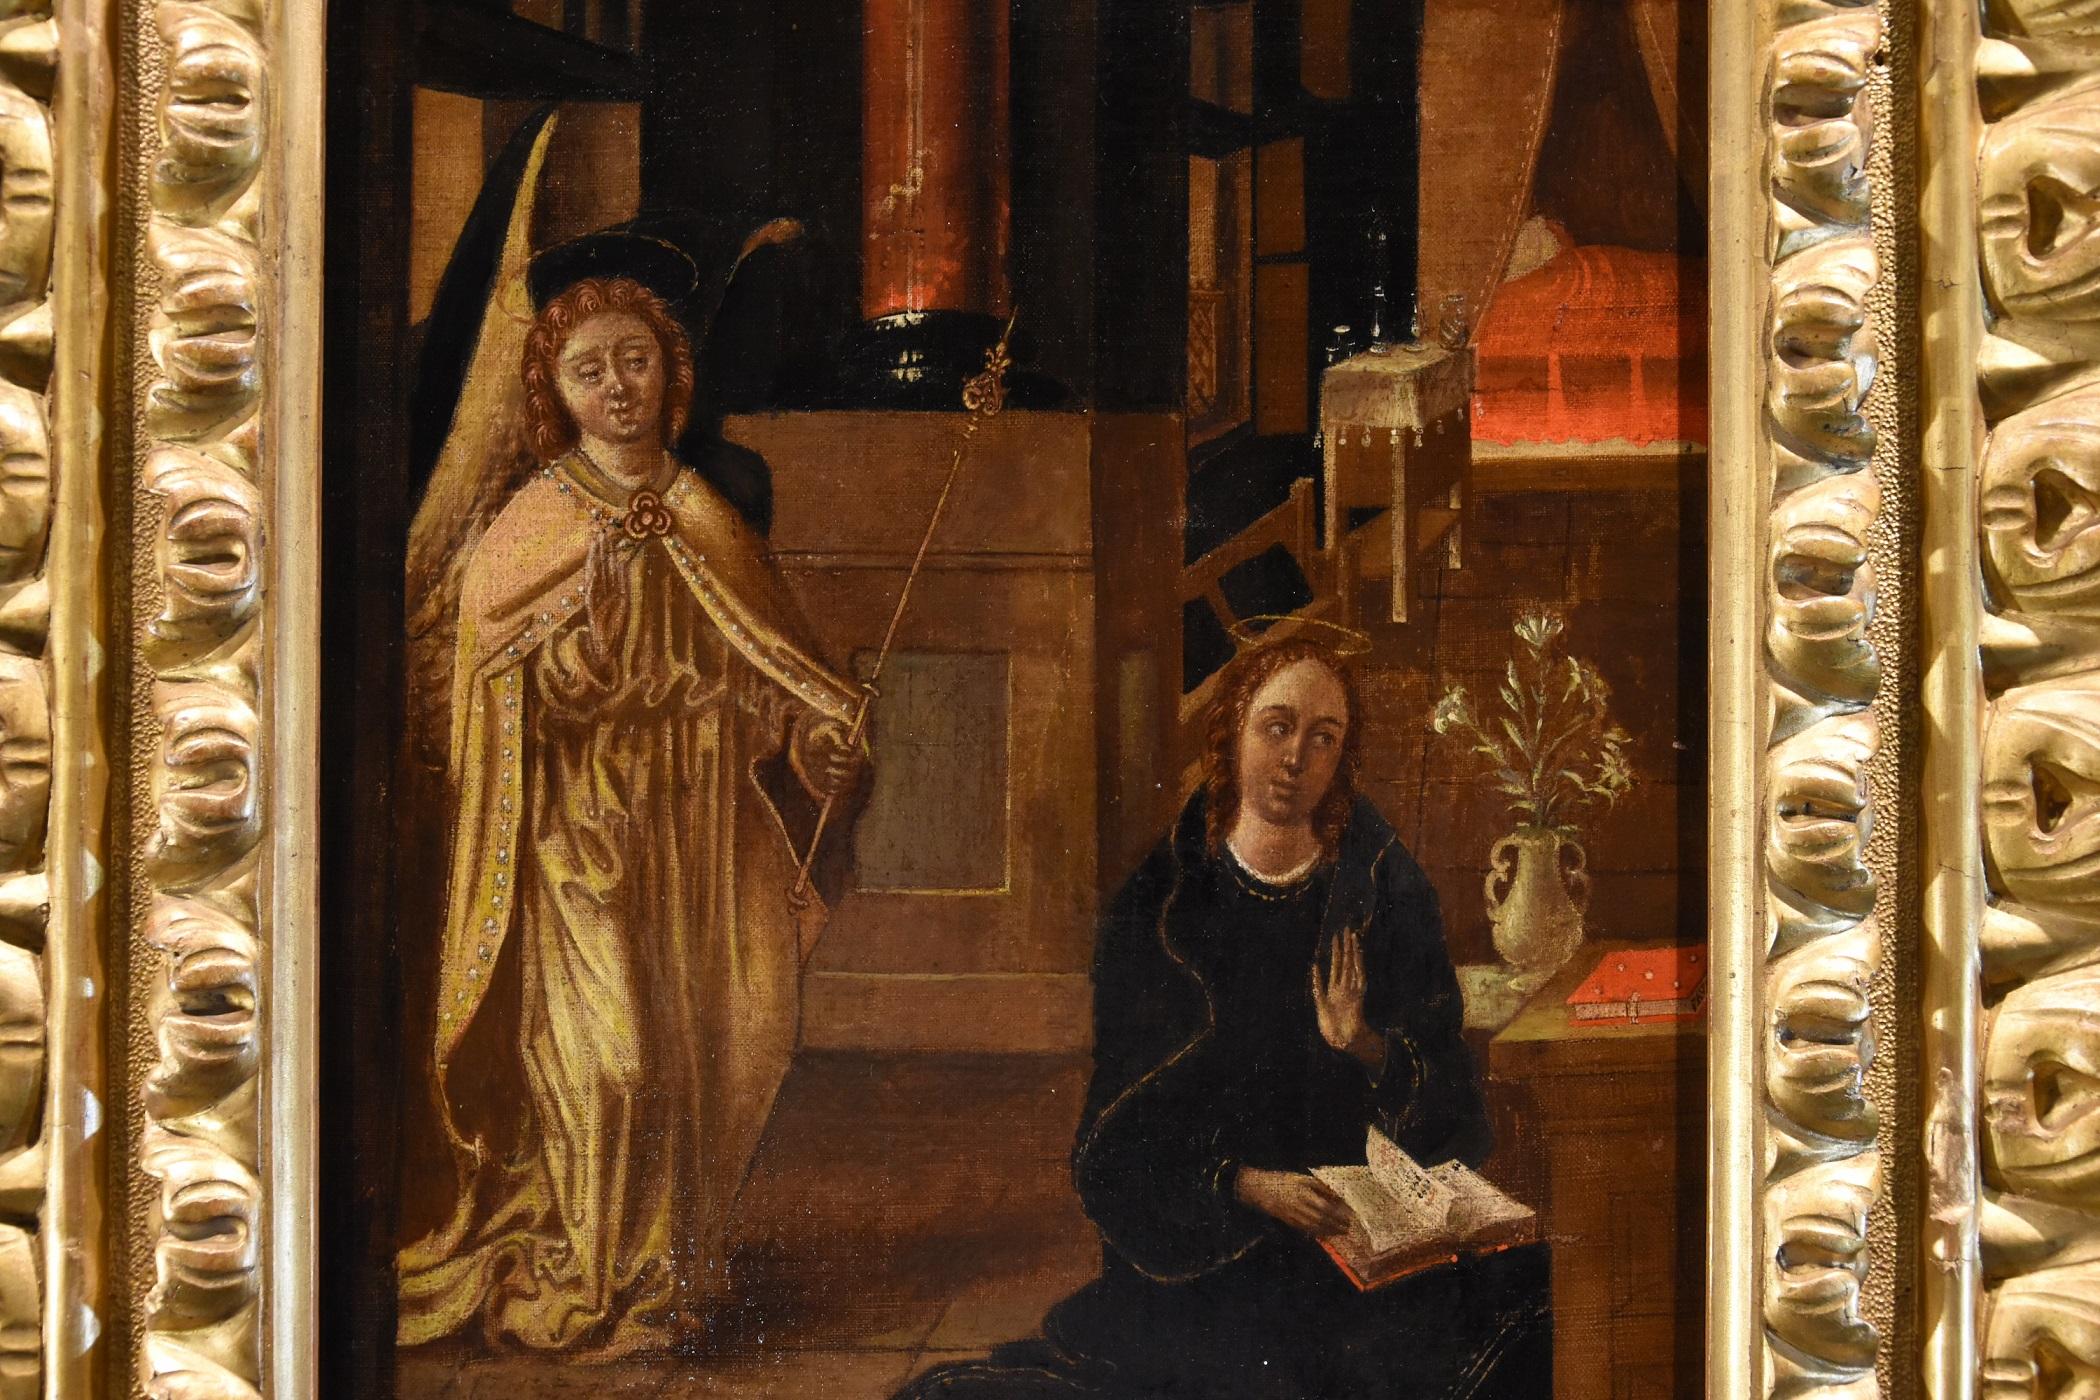 Flemish painter of the 16th-17th century
The Annunciation

Oil on canvas 844 x 33 cm./ in frame 63 x 52 cm.)

The work presents itself with a canonical iconographic and stylistic scheme, with the Archangel Gabriel devoutly delivering the supreme